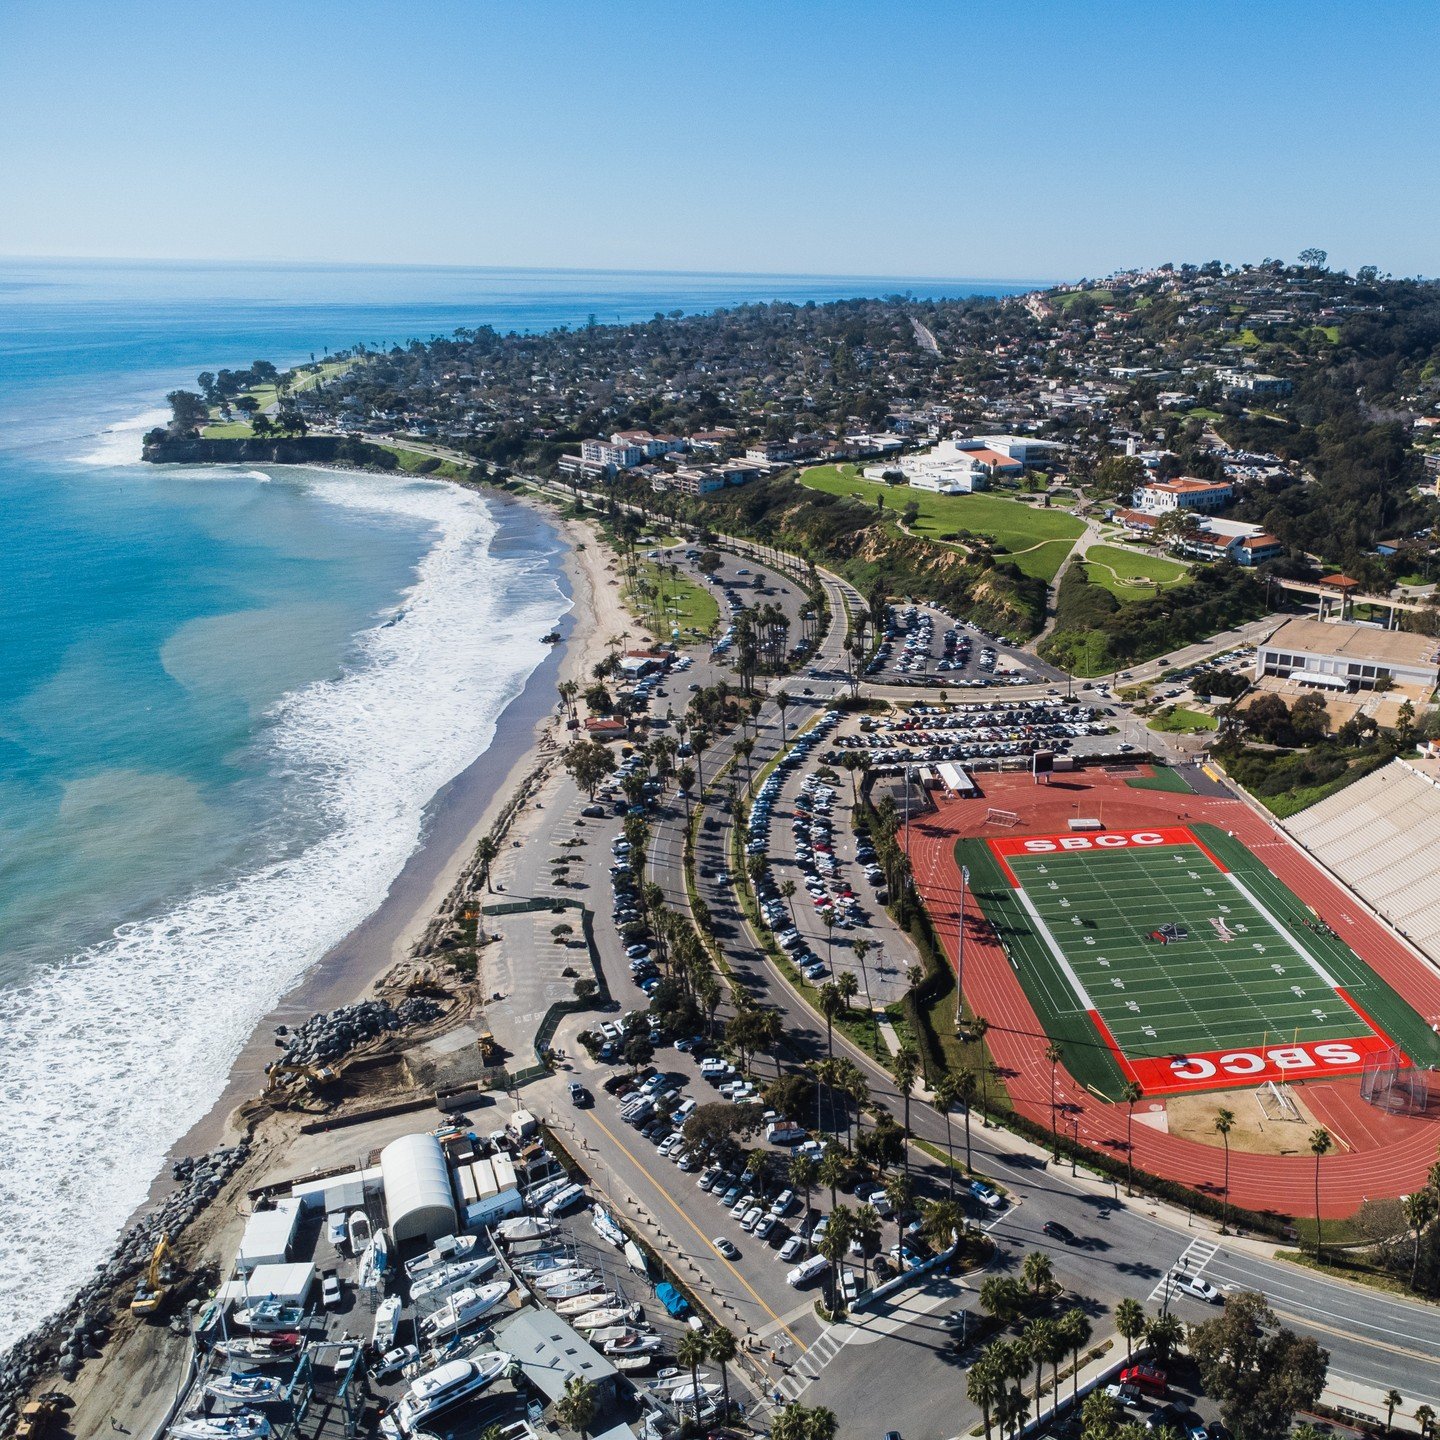 www.santabarbarawedding.com | Santa Barbara City College | View of the College Campus and Football Stadium from Above